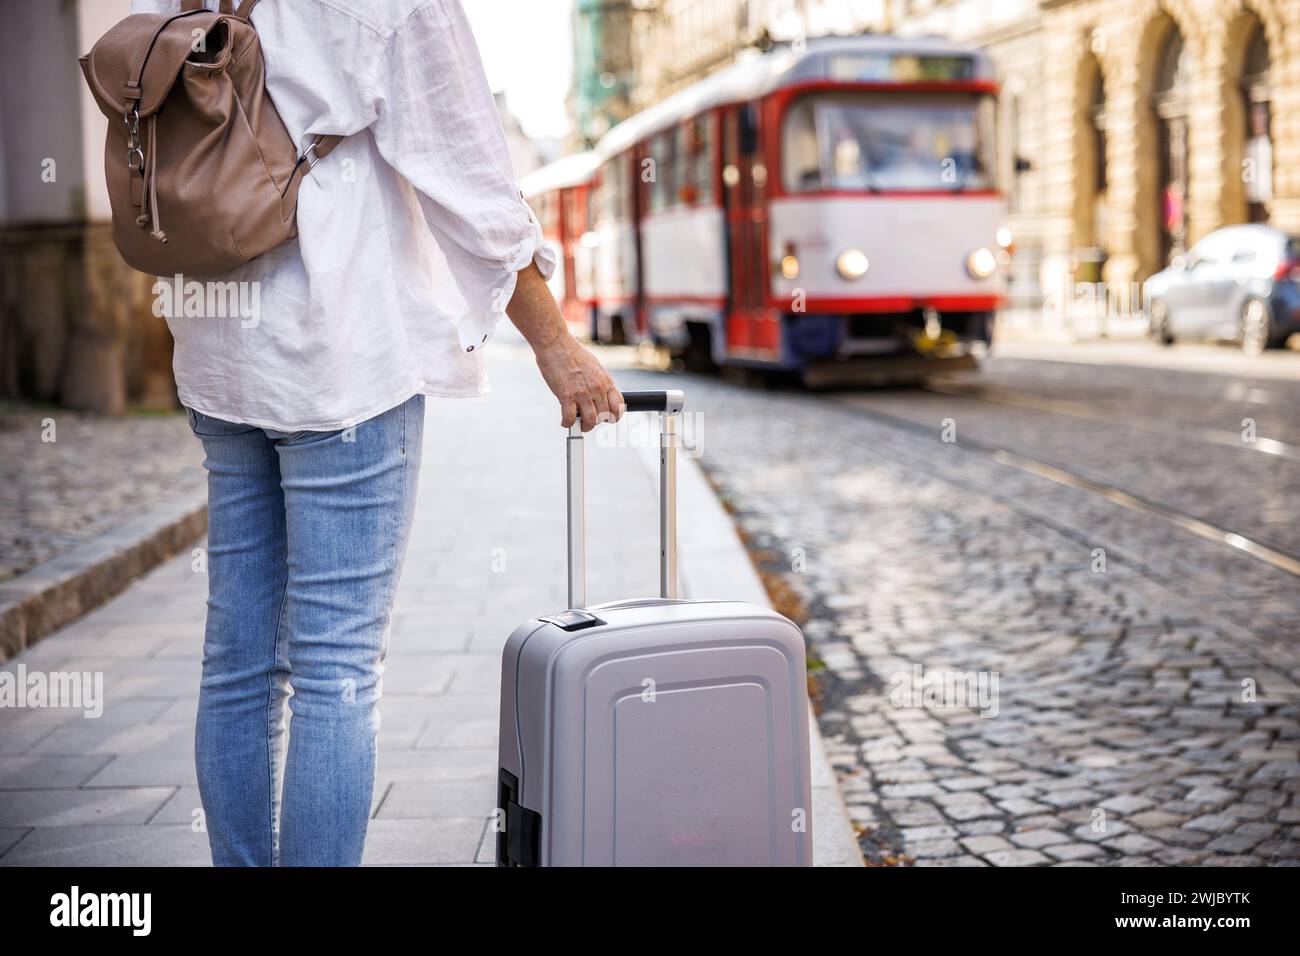 Woman tourist with suitcase and backpack waiting for tram on street. Travel by public transportation in city Stock Photo